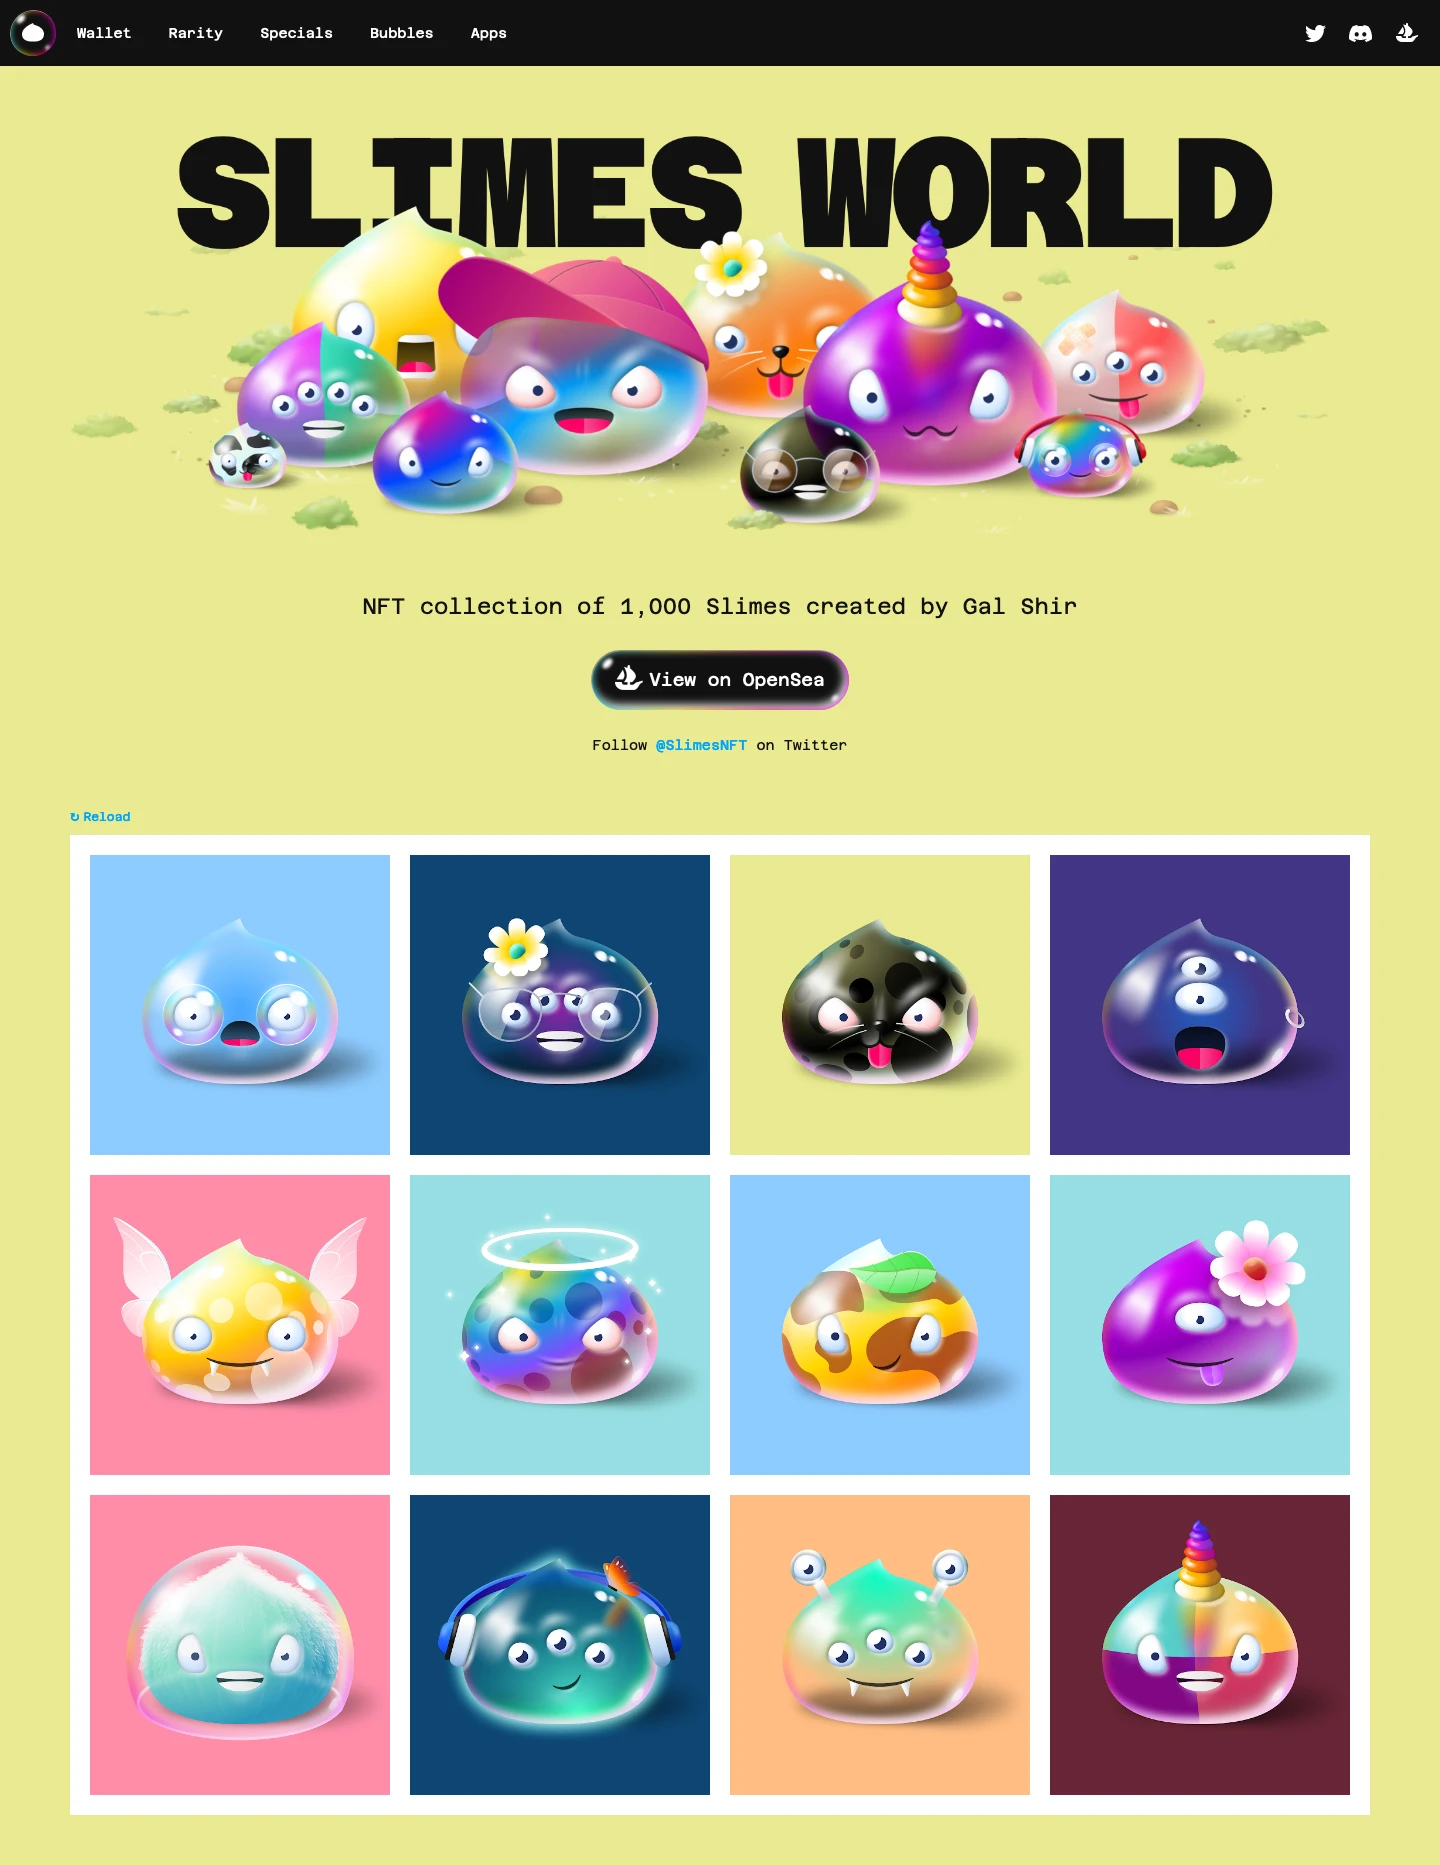 Slimes World Landing Page Example: NFT collection of 1,000 Slimes created by Gal Shir.